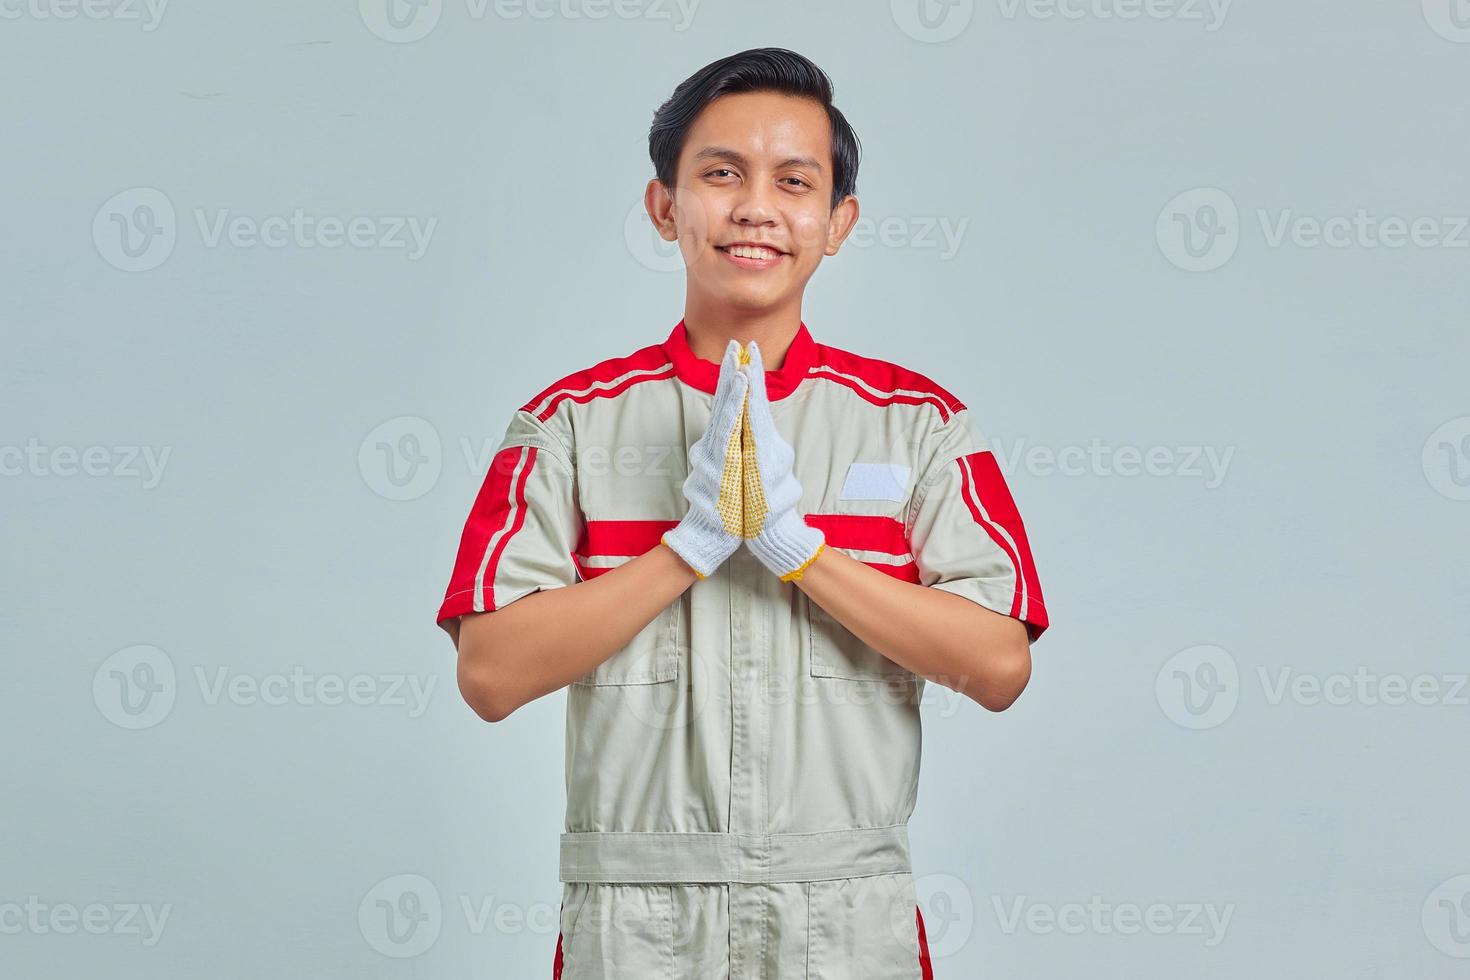 Portrait of young mechanic man greeting with big smile on his face isolated on gray background photo